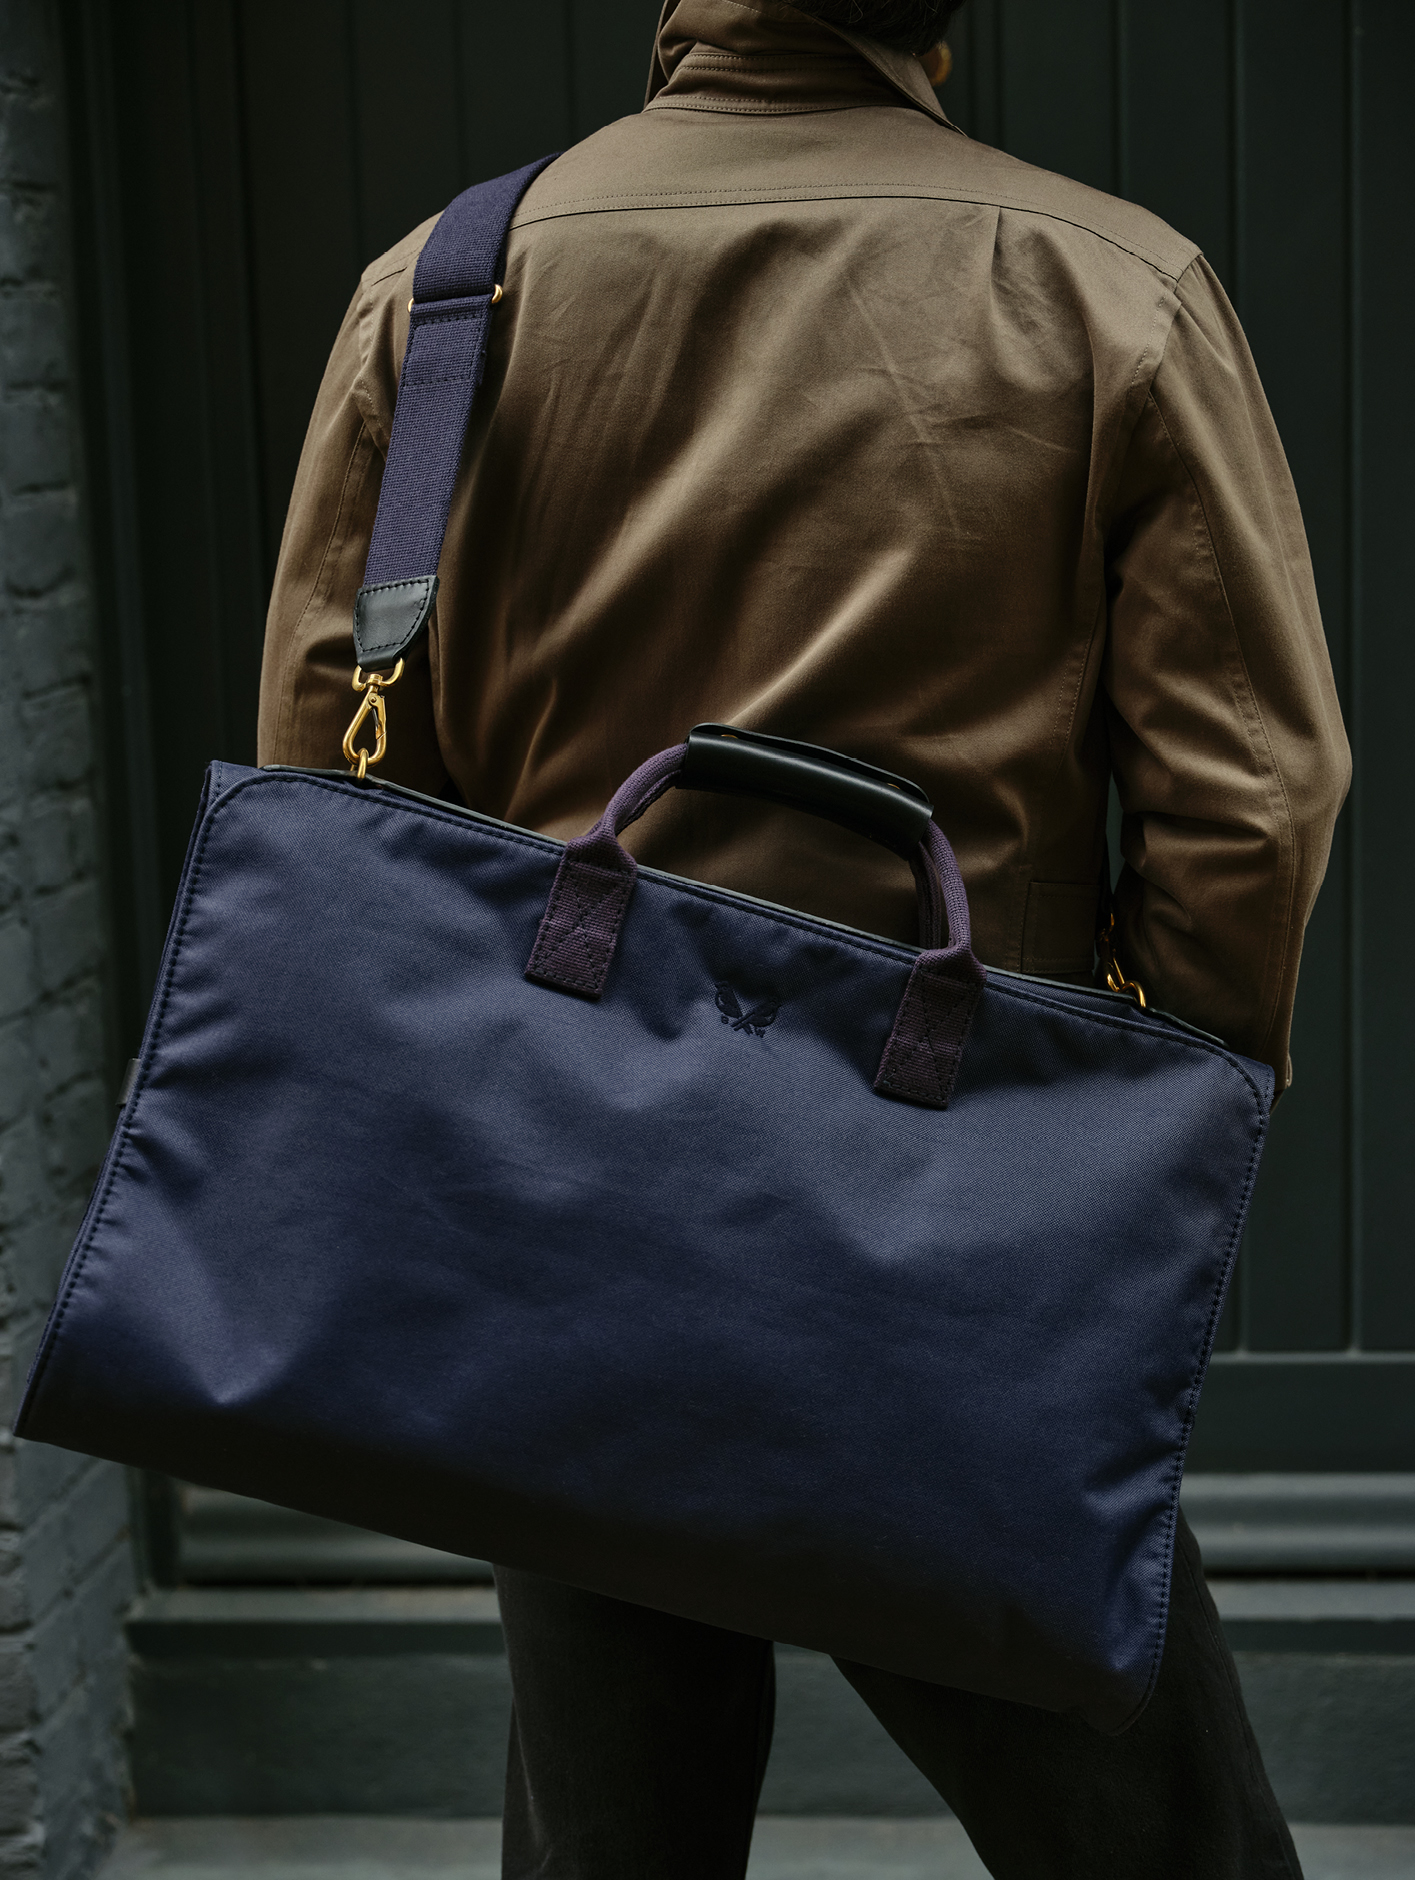 Bennett Winch’s Trifold suit carrier in navy